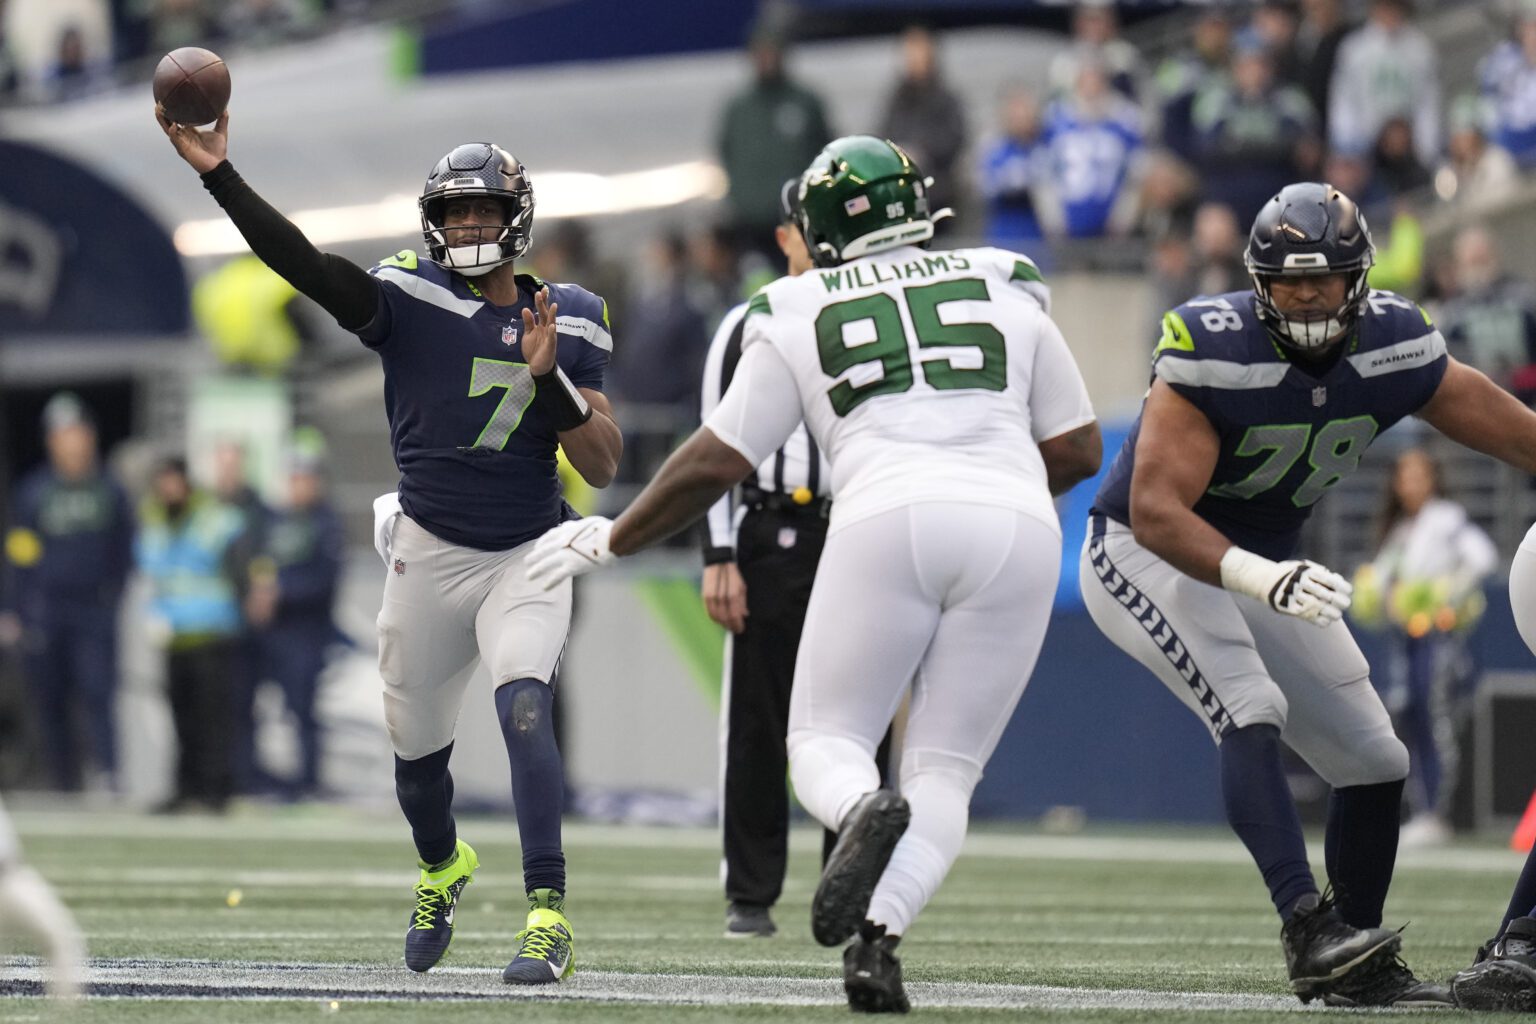 Seattle Seahawks quarterback Geno Smith launches a pass against the New York Jets during the first half of an NFL football game on Jan. 1.